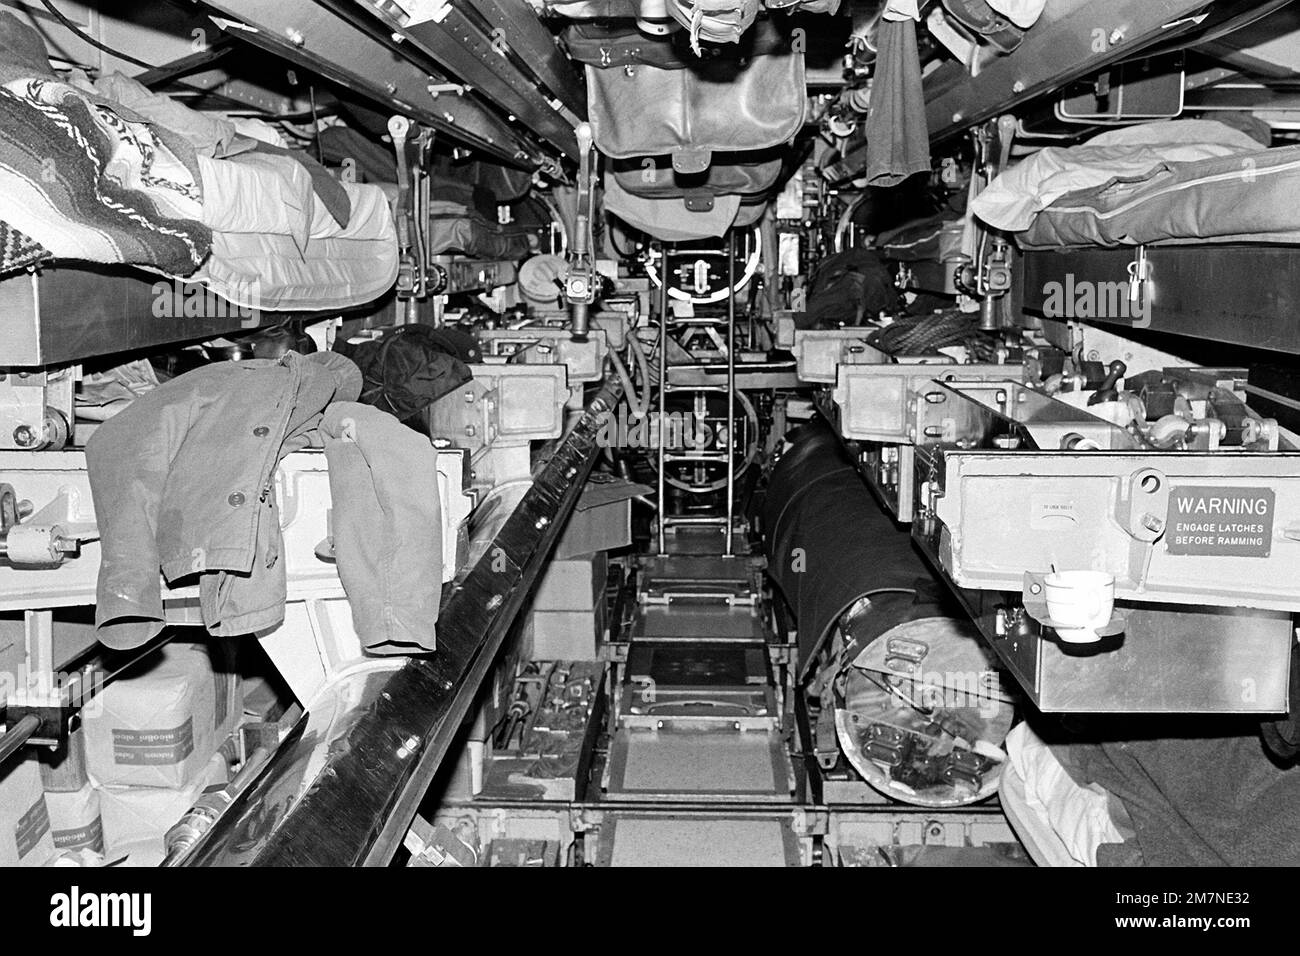 A view of the enlisted sleeping quarters aboard the attack submarine USS BONEFISH (SS-582) during exercise Unitas XX. Subject Operation/Series: UNITAS XX Base: Talcahuano Country: Chile (CHL) Stock Photo